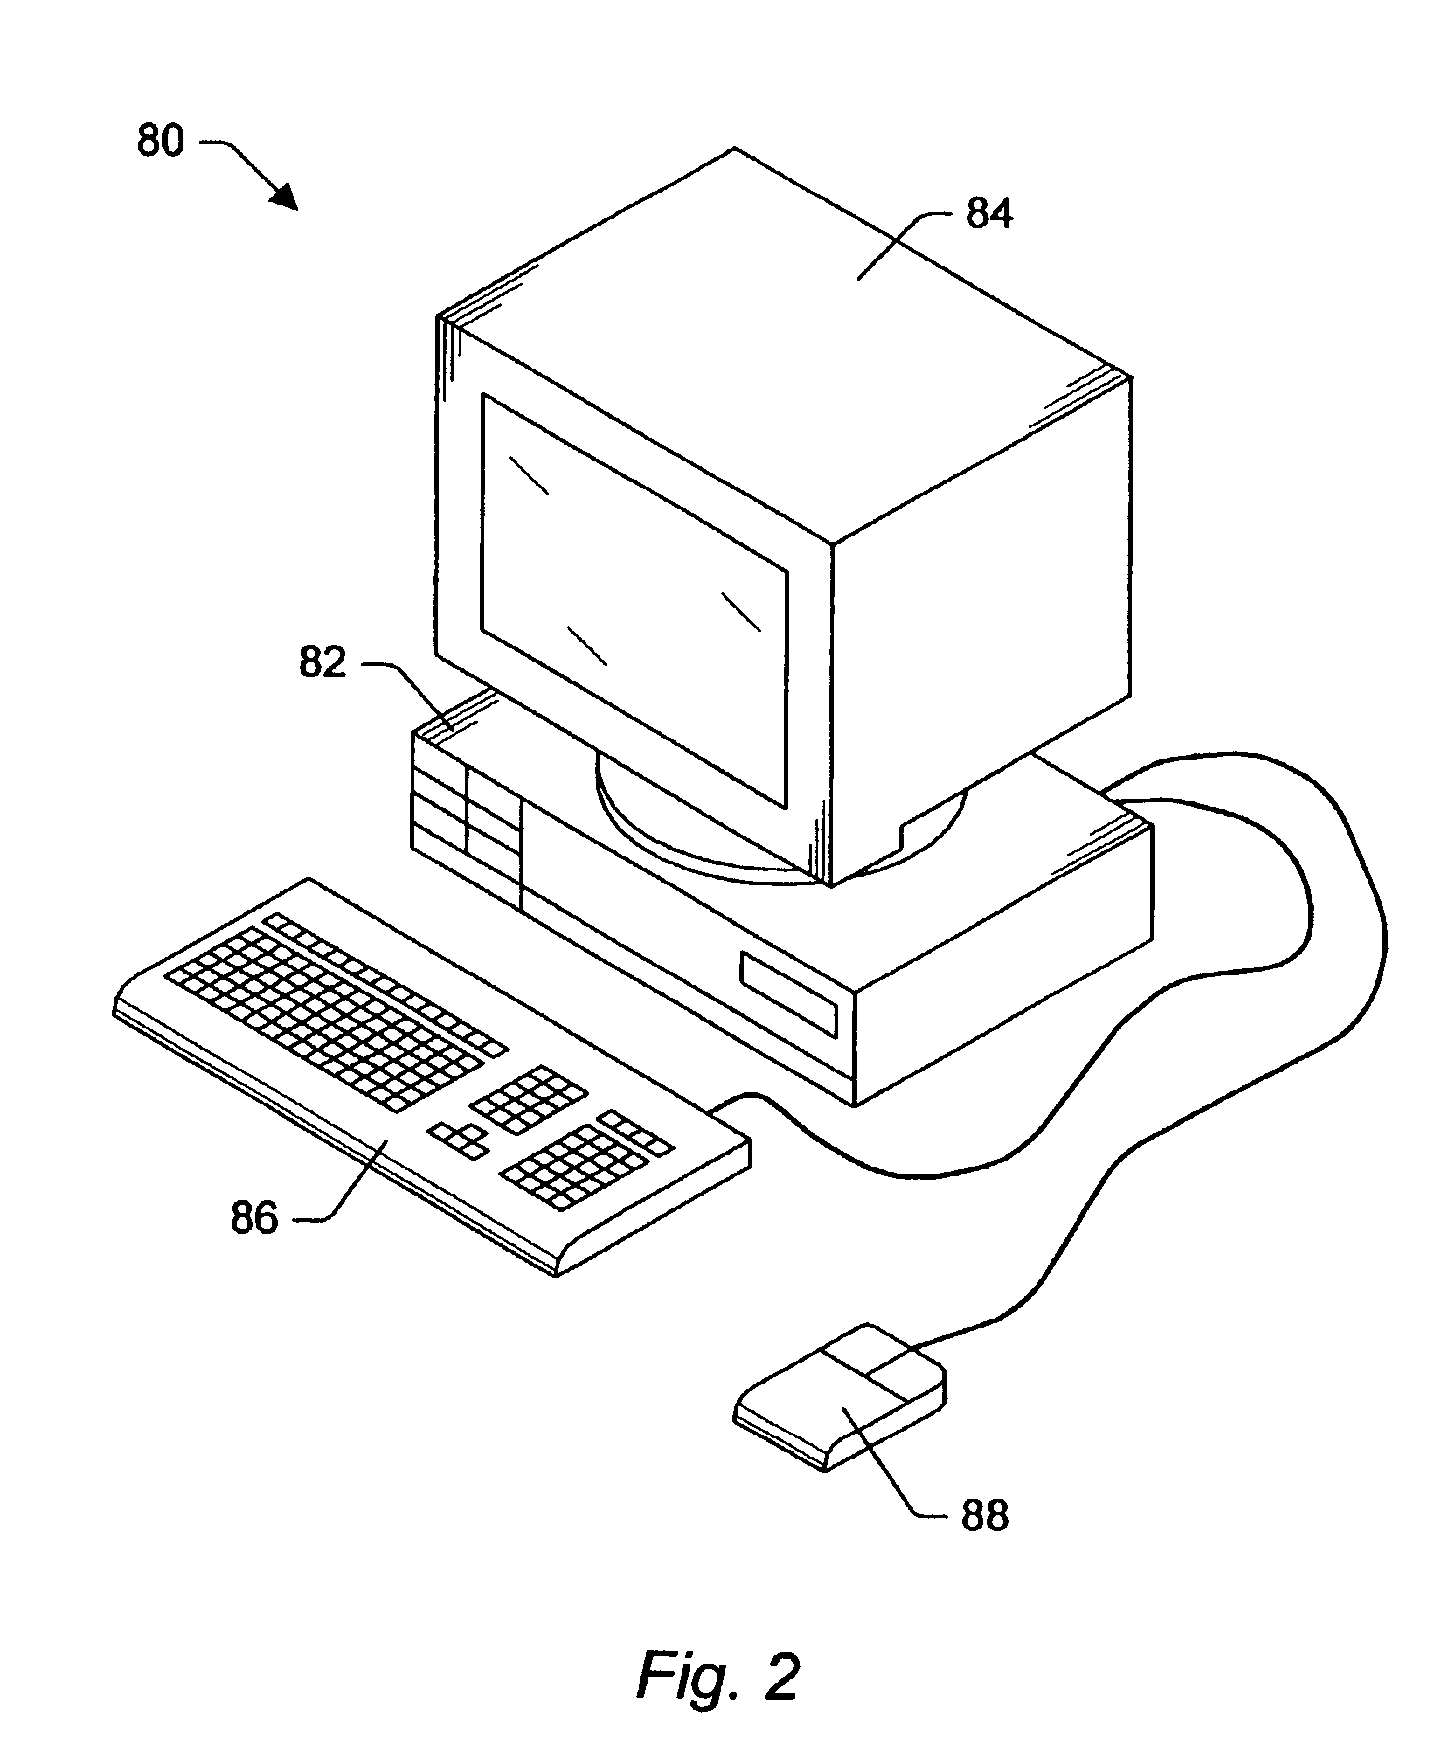 Managing a codec engine for memory compression/decompression operations using a data movement engine